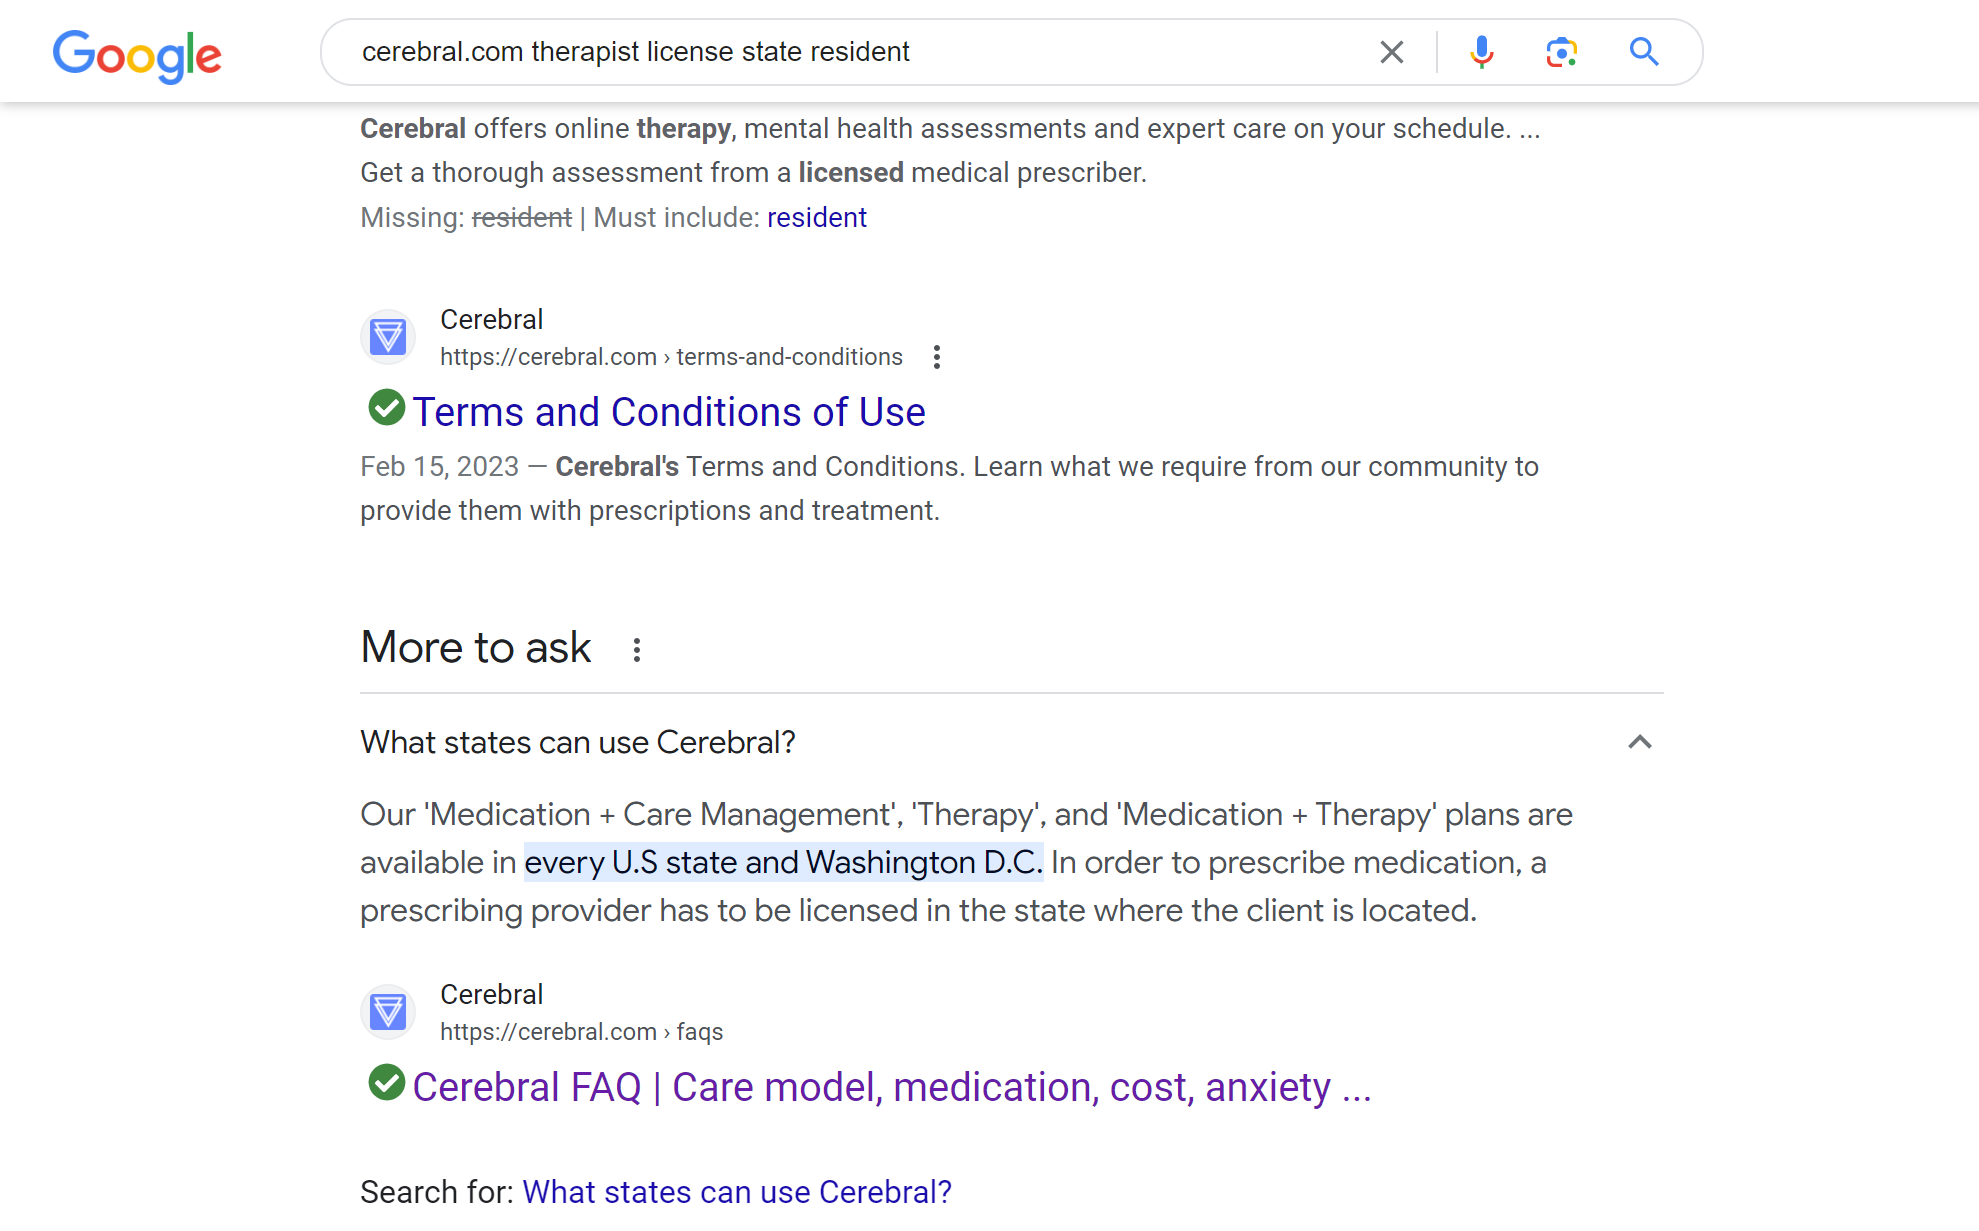 Why don't teletherapy platforms talk about location-restricted therapy?